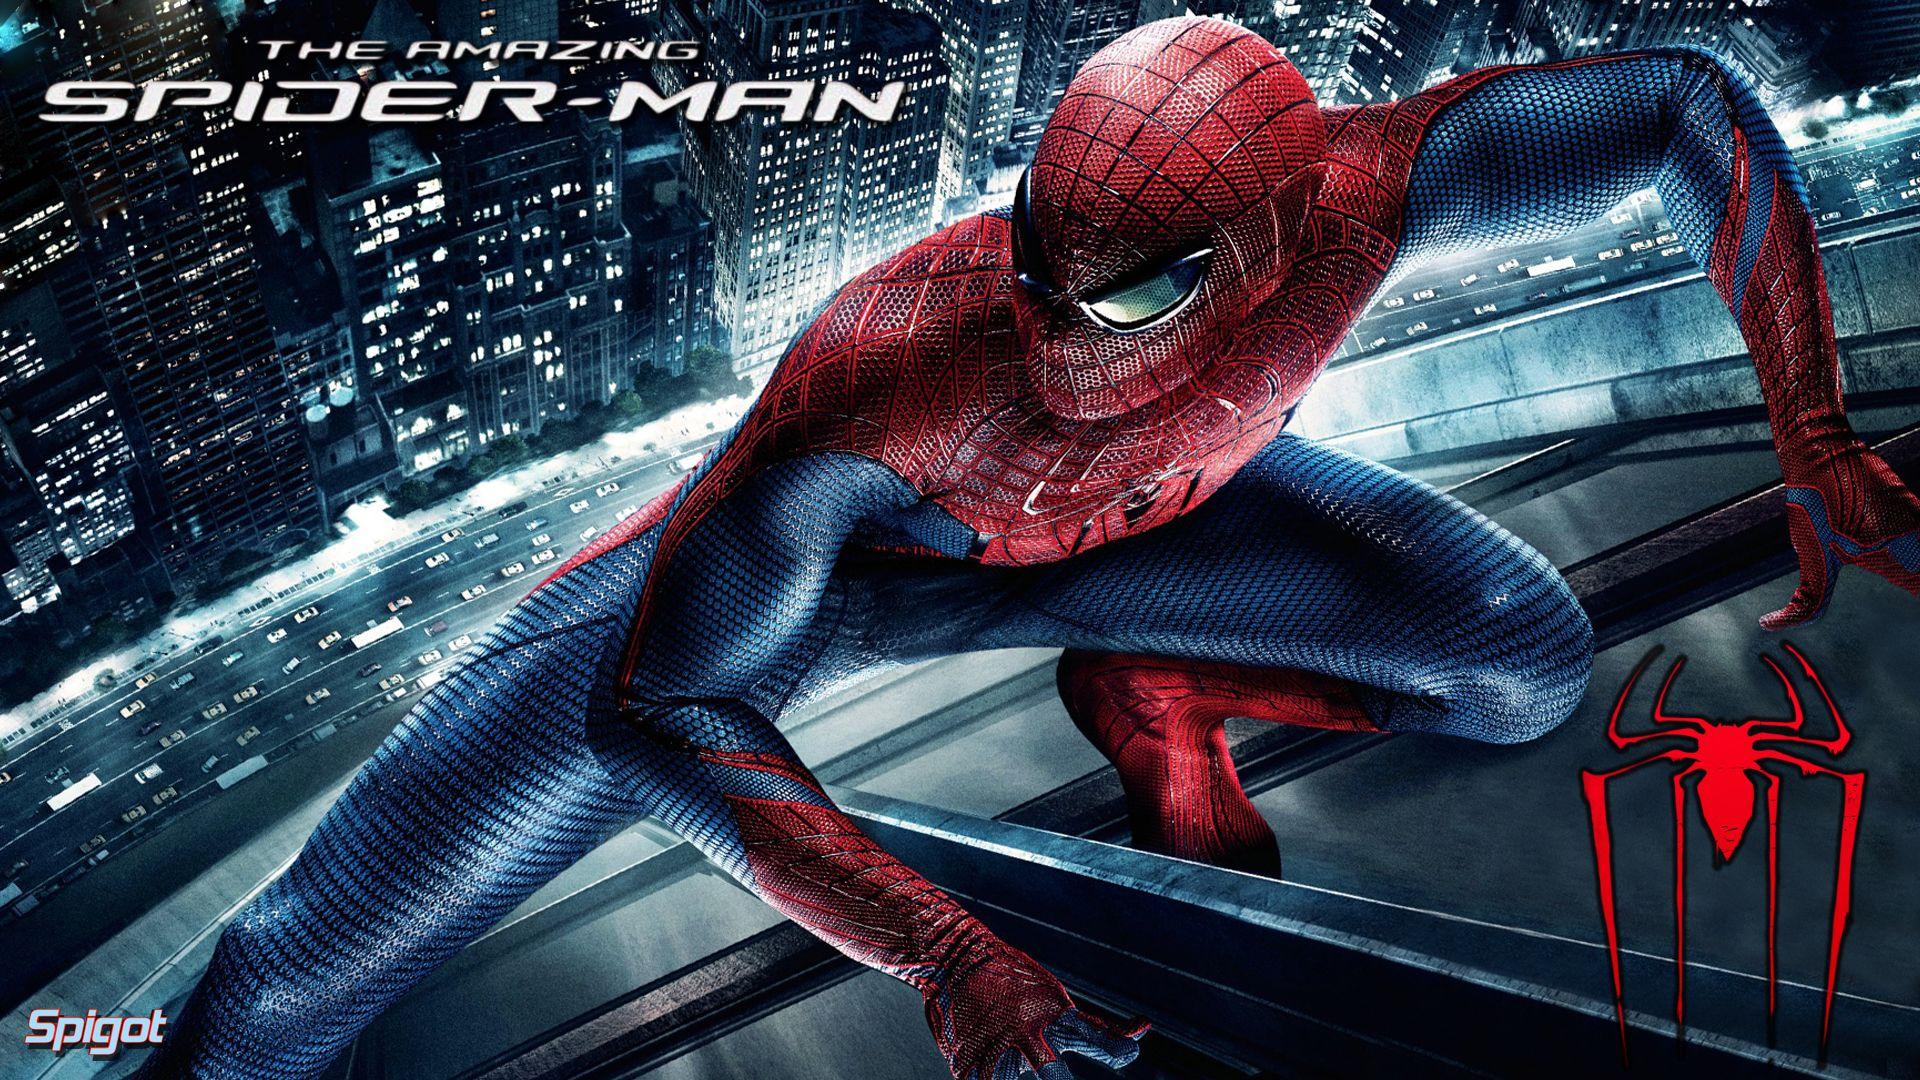 The Amazing Spider Man Wallpaper For Windows7 Wallpaper. Game